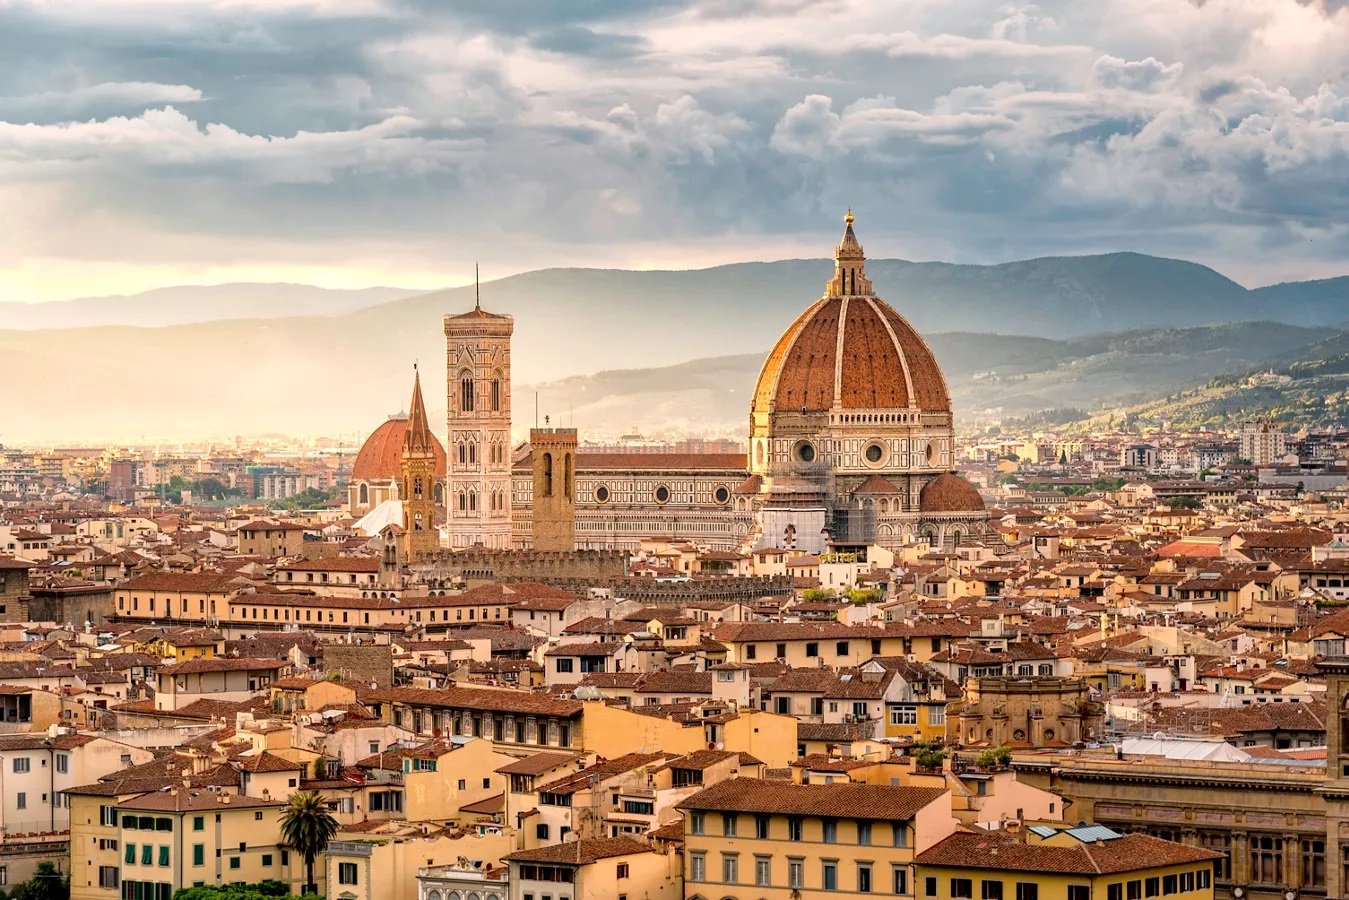 Day 9 Guided walking city tour of Florence. View the remarkable and famous Leaning Tower of Pisa